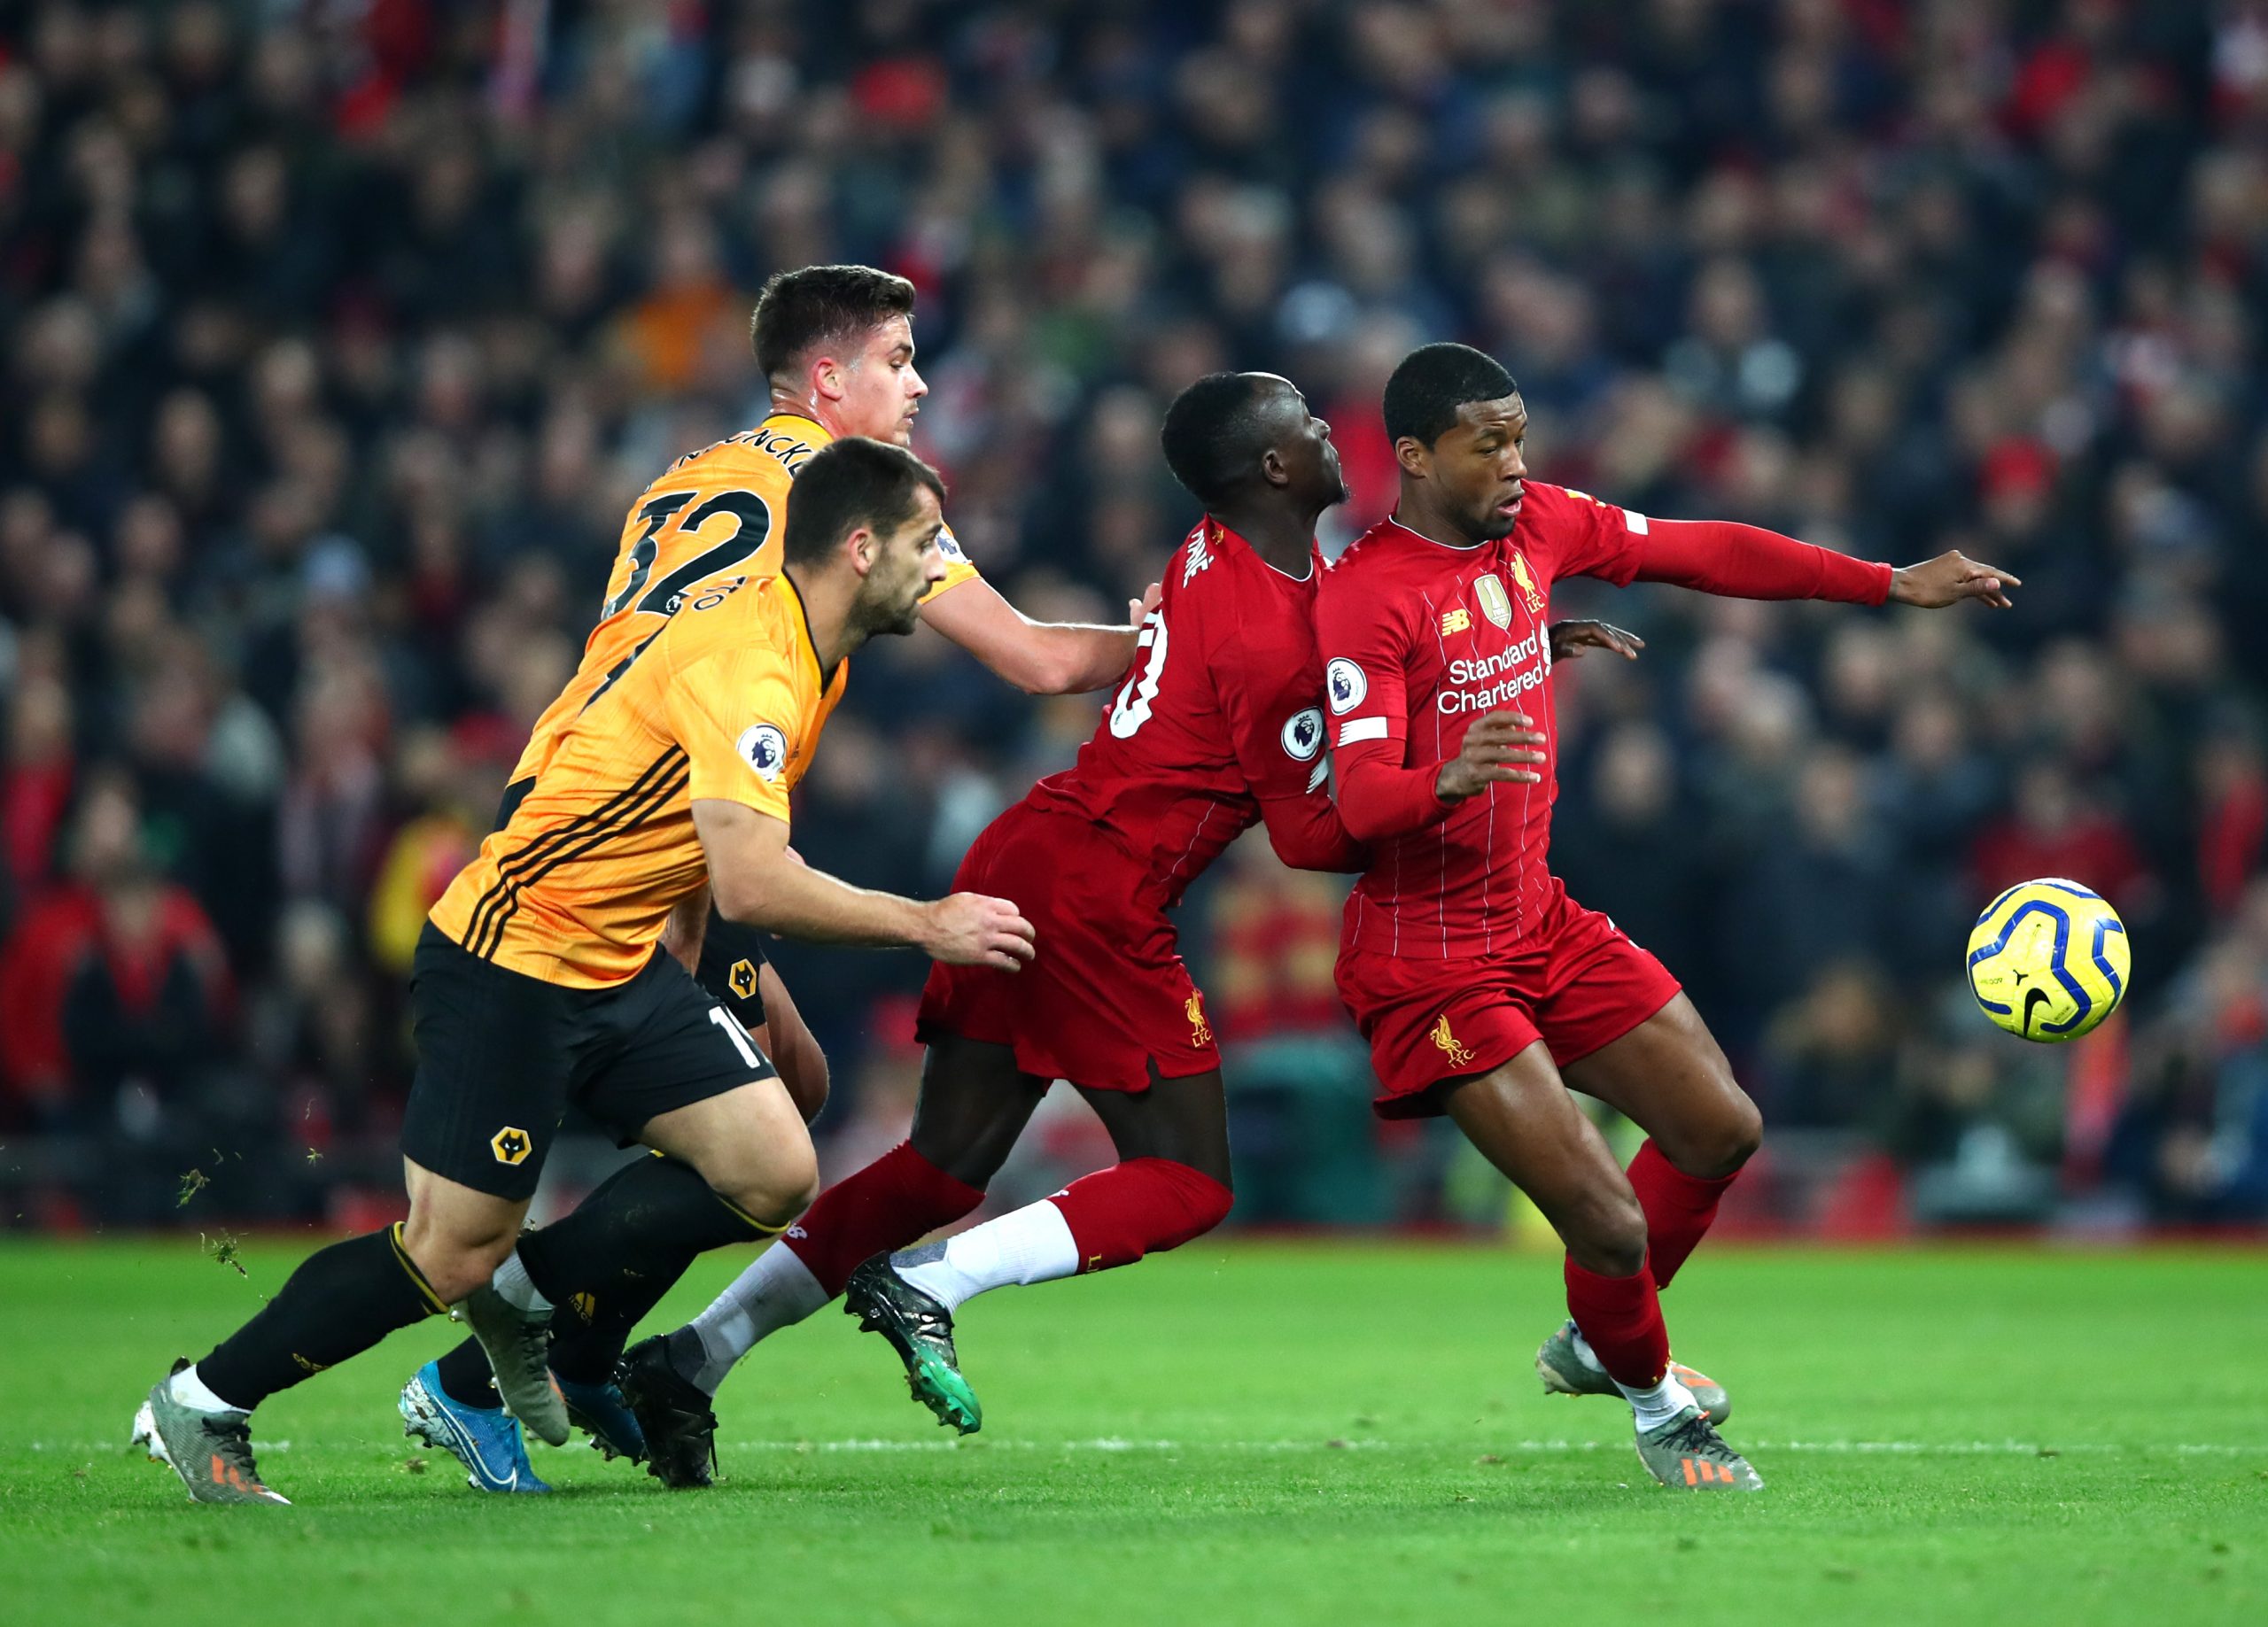 LIVERPOOL, ENGLAND - DECEMBER 29: Georginio Wijnaldum of Liverpool and Sadio Mane of Liverpool are closed down by Leander Dendoncker of Wolverhampton Wanderers during the Premier League match between Liverpool FC and Wolverhampton Wanderers at Anfield on December 29, 2019 in Liverpool, United Kingdom. (Photo by Clive Brunskill/Getty Images)